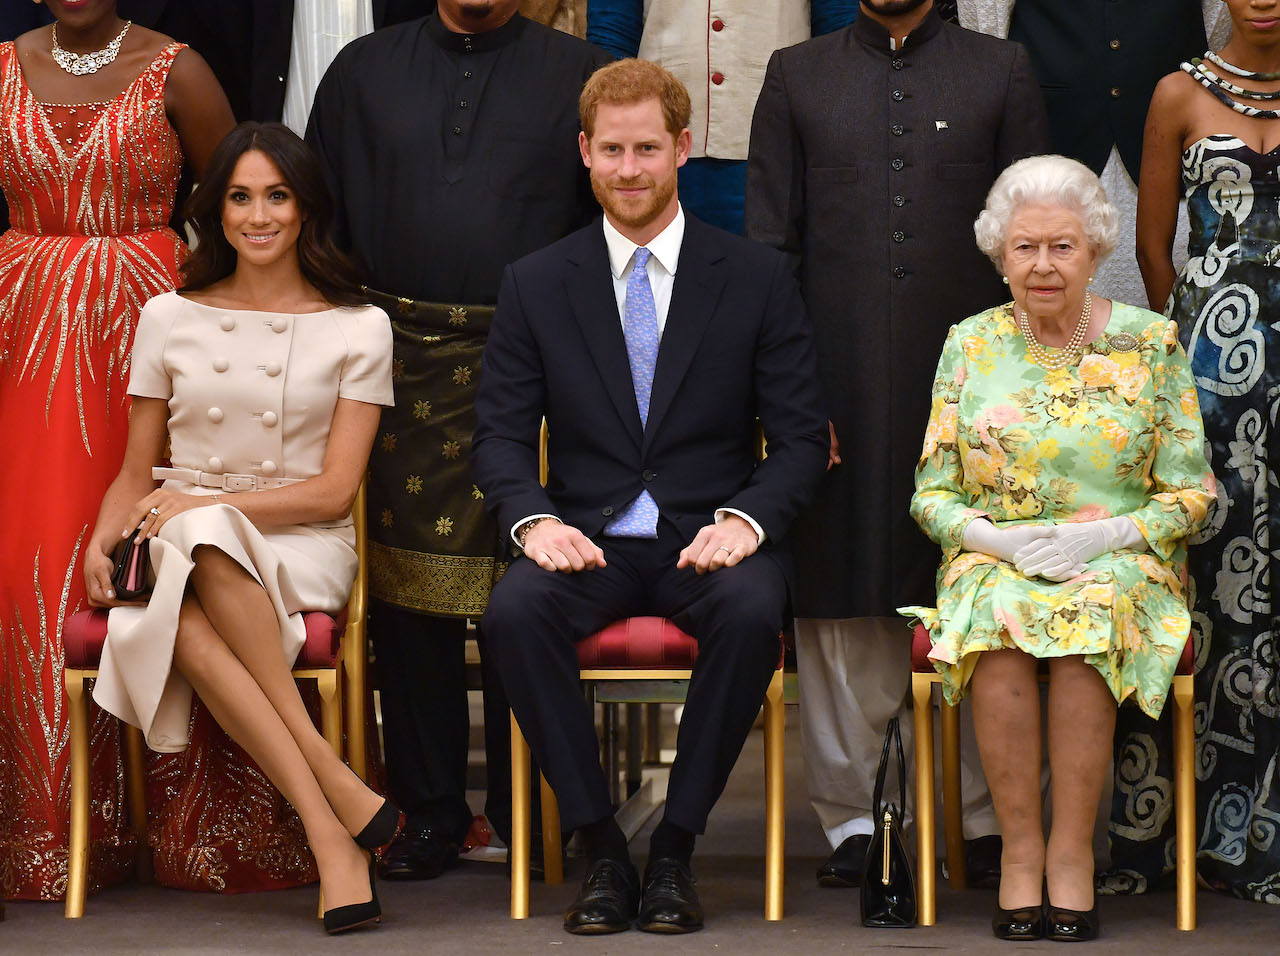 Meghan Markle, Duchess of Sussex, Prince Harry, Duke of Sussex, and Queen Elizabeth II at the Queen's Young Leaders Awards Ceremony at Buckingham Palace on June 26, 2018, in London, England.